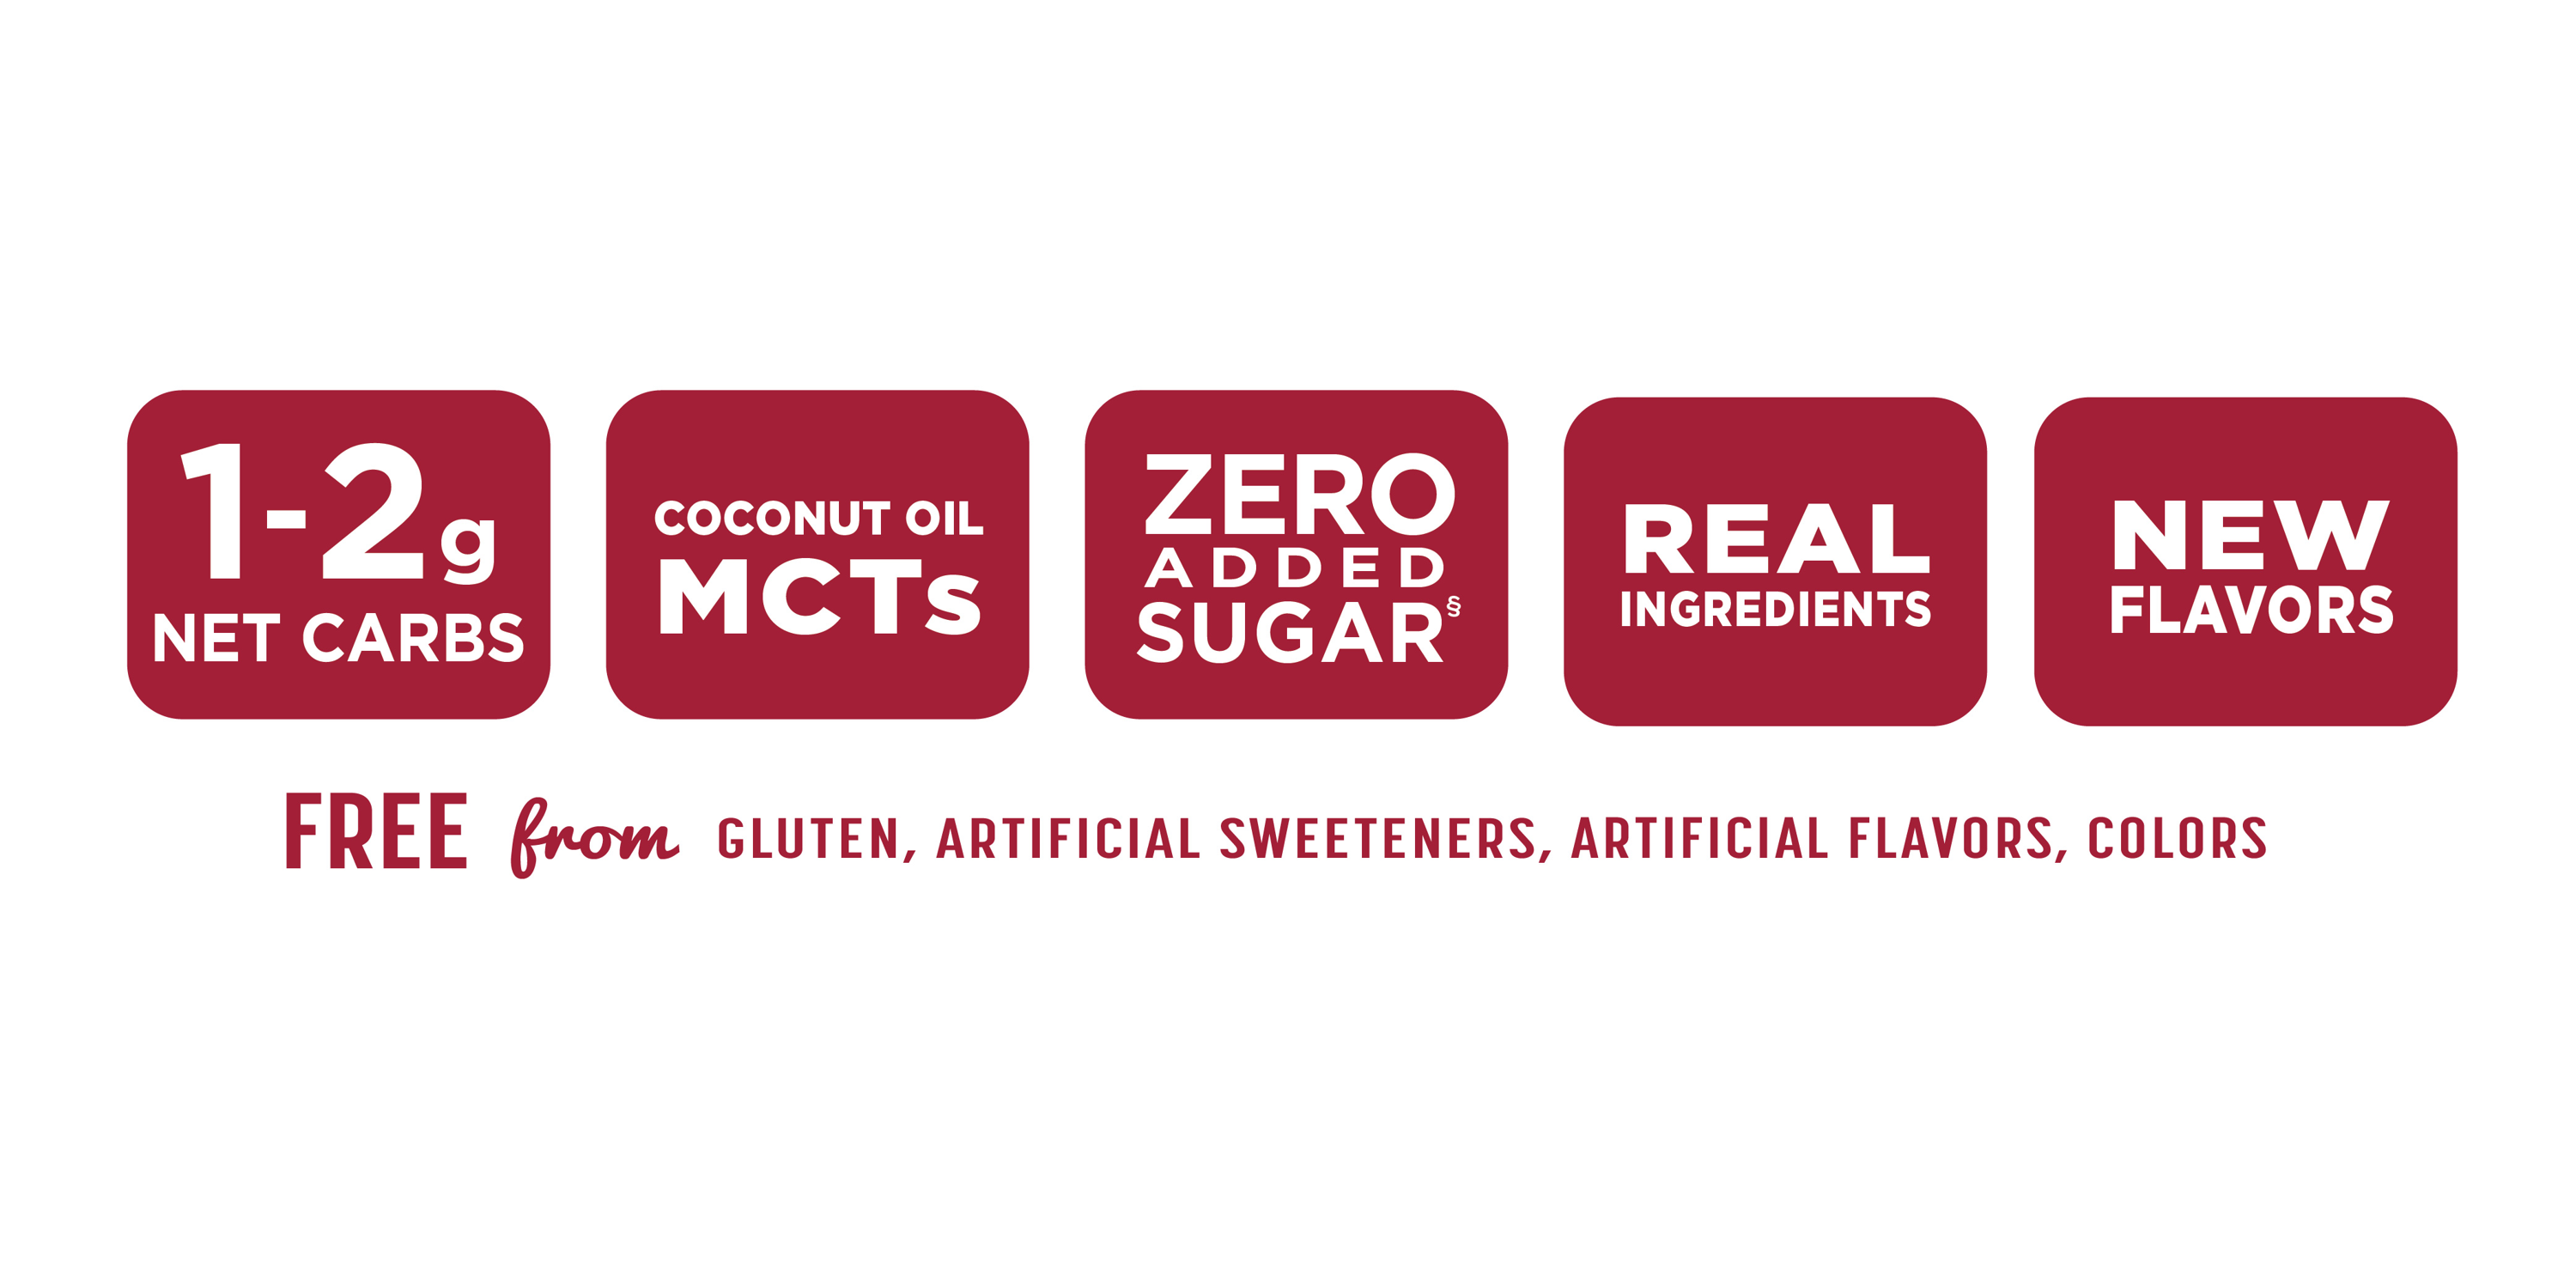 1-2g net carbs, coconut oil MCTs, zero added sugar, real ingredients, new flavors- Free from gluten, artificial sweeteners, colors